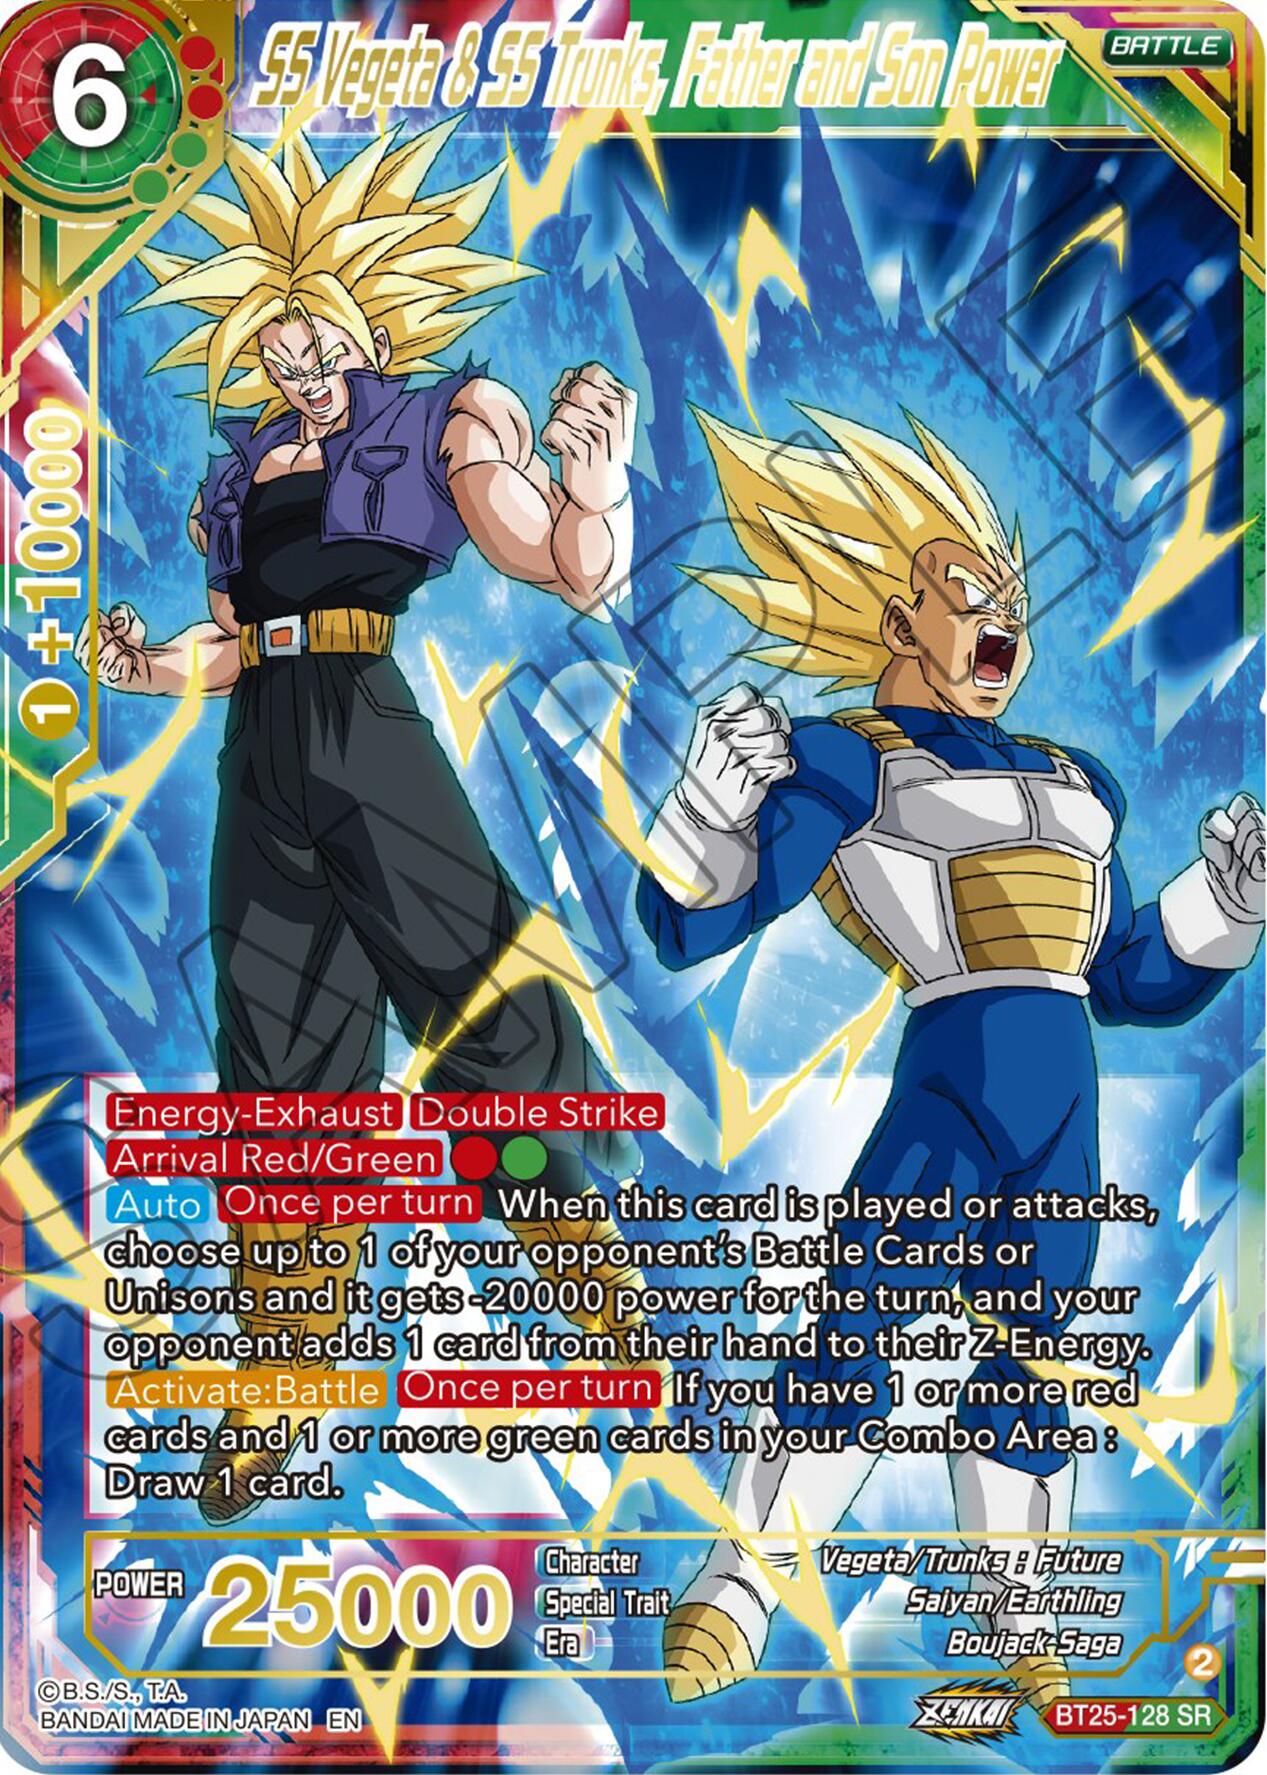 SS Vegeta & SS Trunks, Father and Son Power (BT25-128) [Legend of the Dragon Balls] | Devastation Store